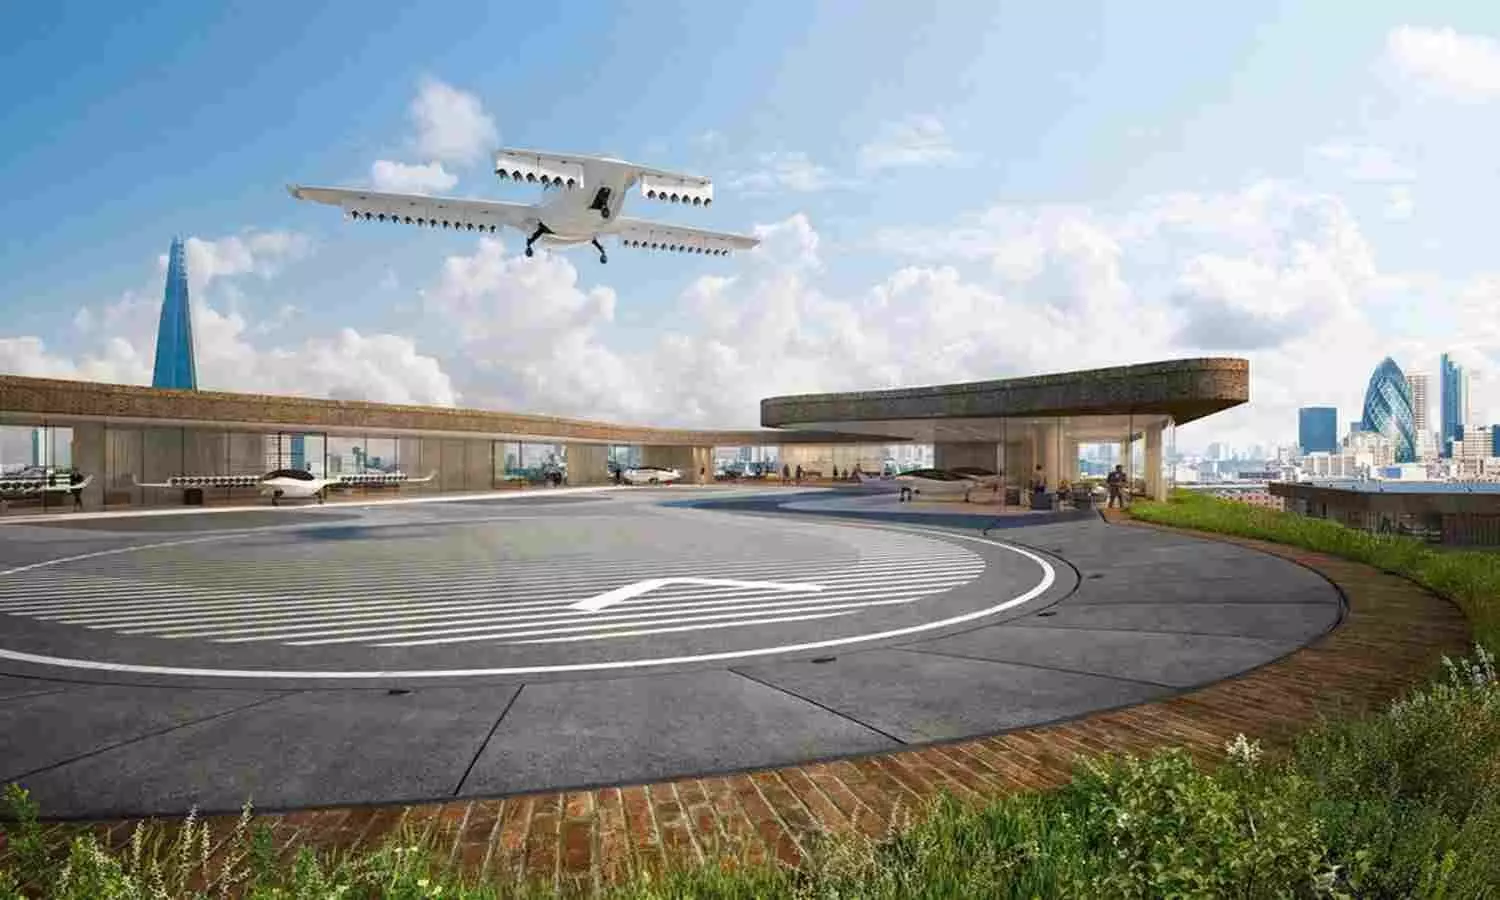 FAA releases vertiport standards for AAM aircraft